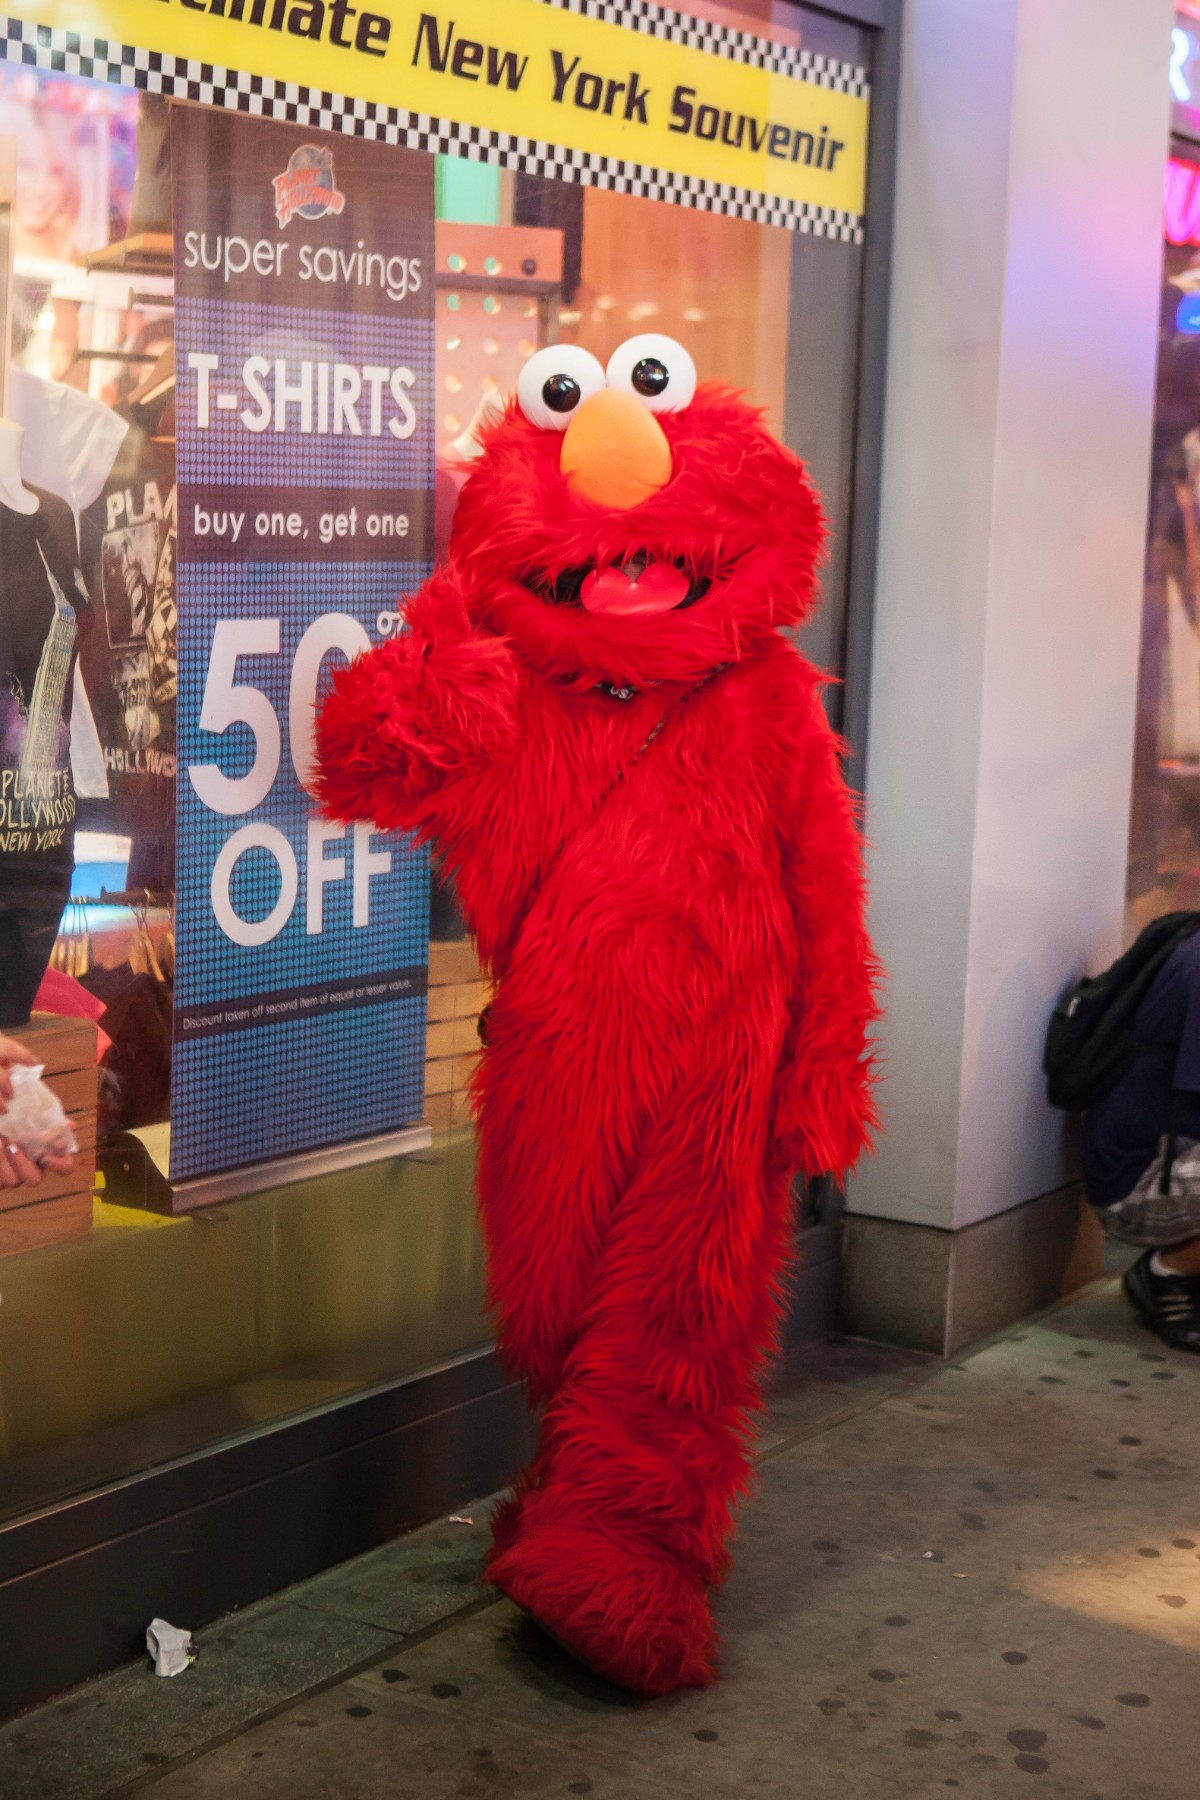 One of the various costumed character in Times Square